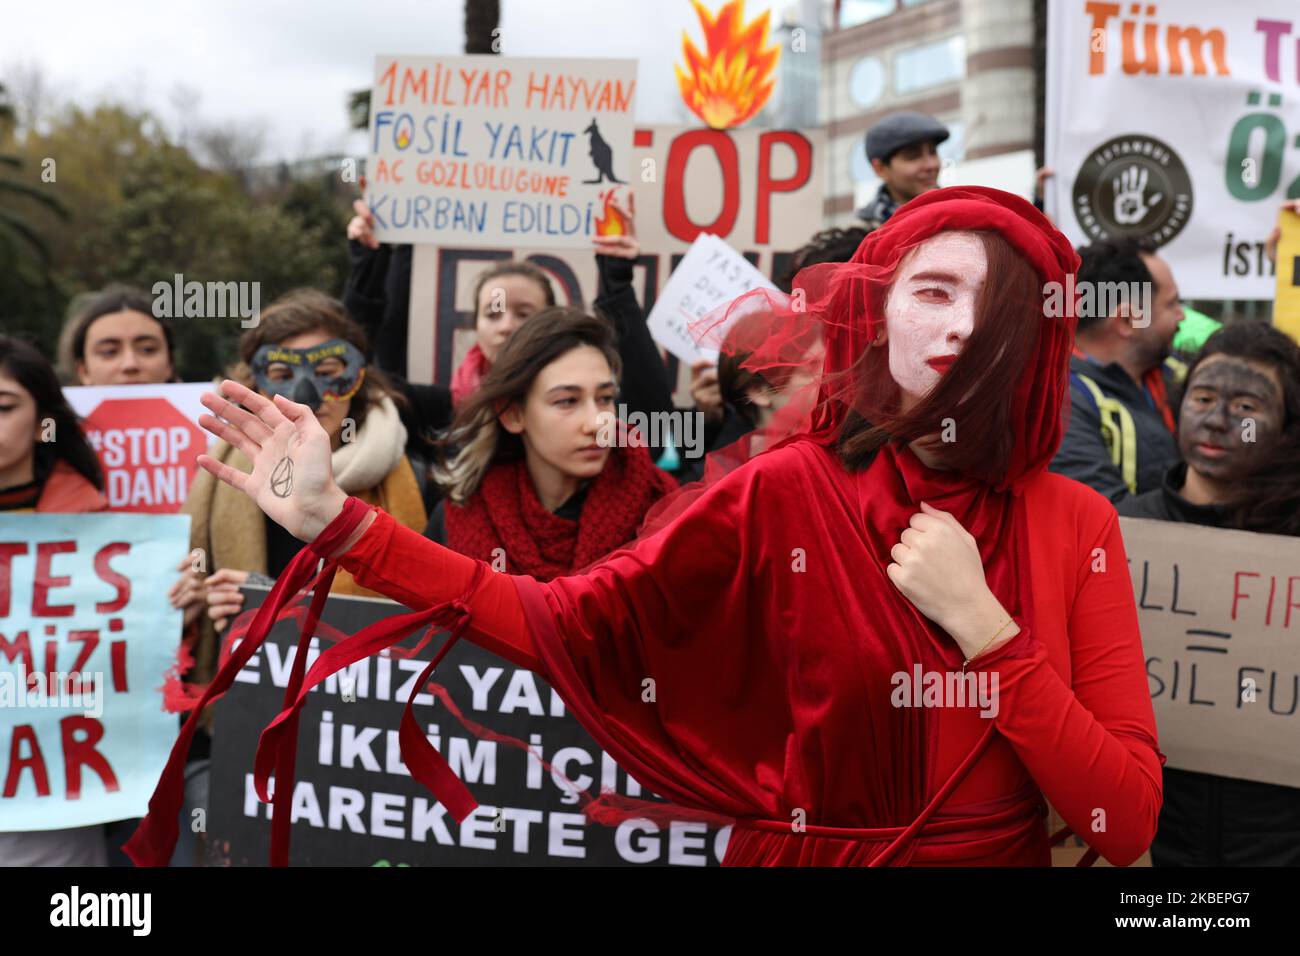 Students in Istanbul gathered for a protest in front of the Australian Consulate in Istanbul on January 17, 2020, in relation to the recent fires in Australia and the climate crisis. The demonstration was organized by Fridays for Future Turkey, and was supported by the ecologist groups Extinction Rebellion Turkey, Zero Future Campaign, HAYDI, Istanbul Vegan Initiative and Eco Student. Representation of the Red Brigades seen during the demonstration. (Photo by Erhan Demirtas/NurPhoto) Stock Photo